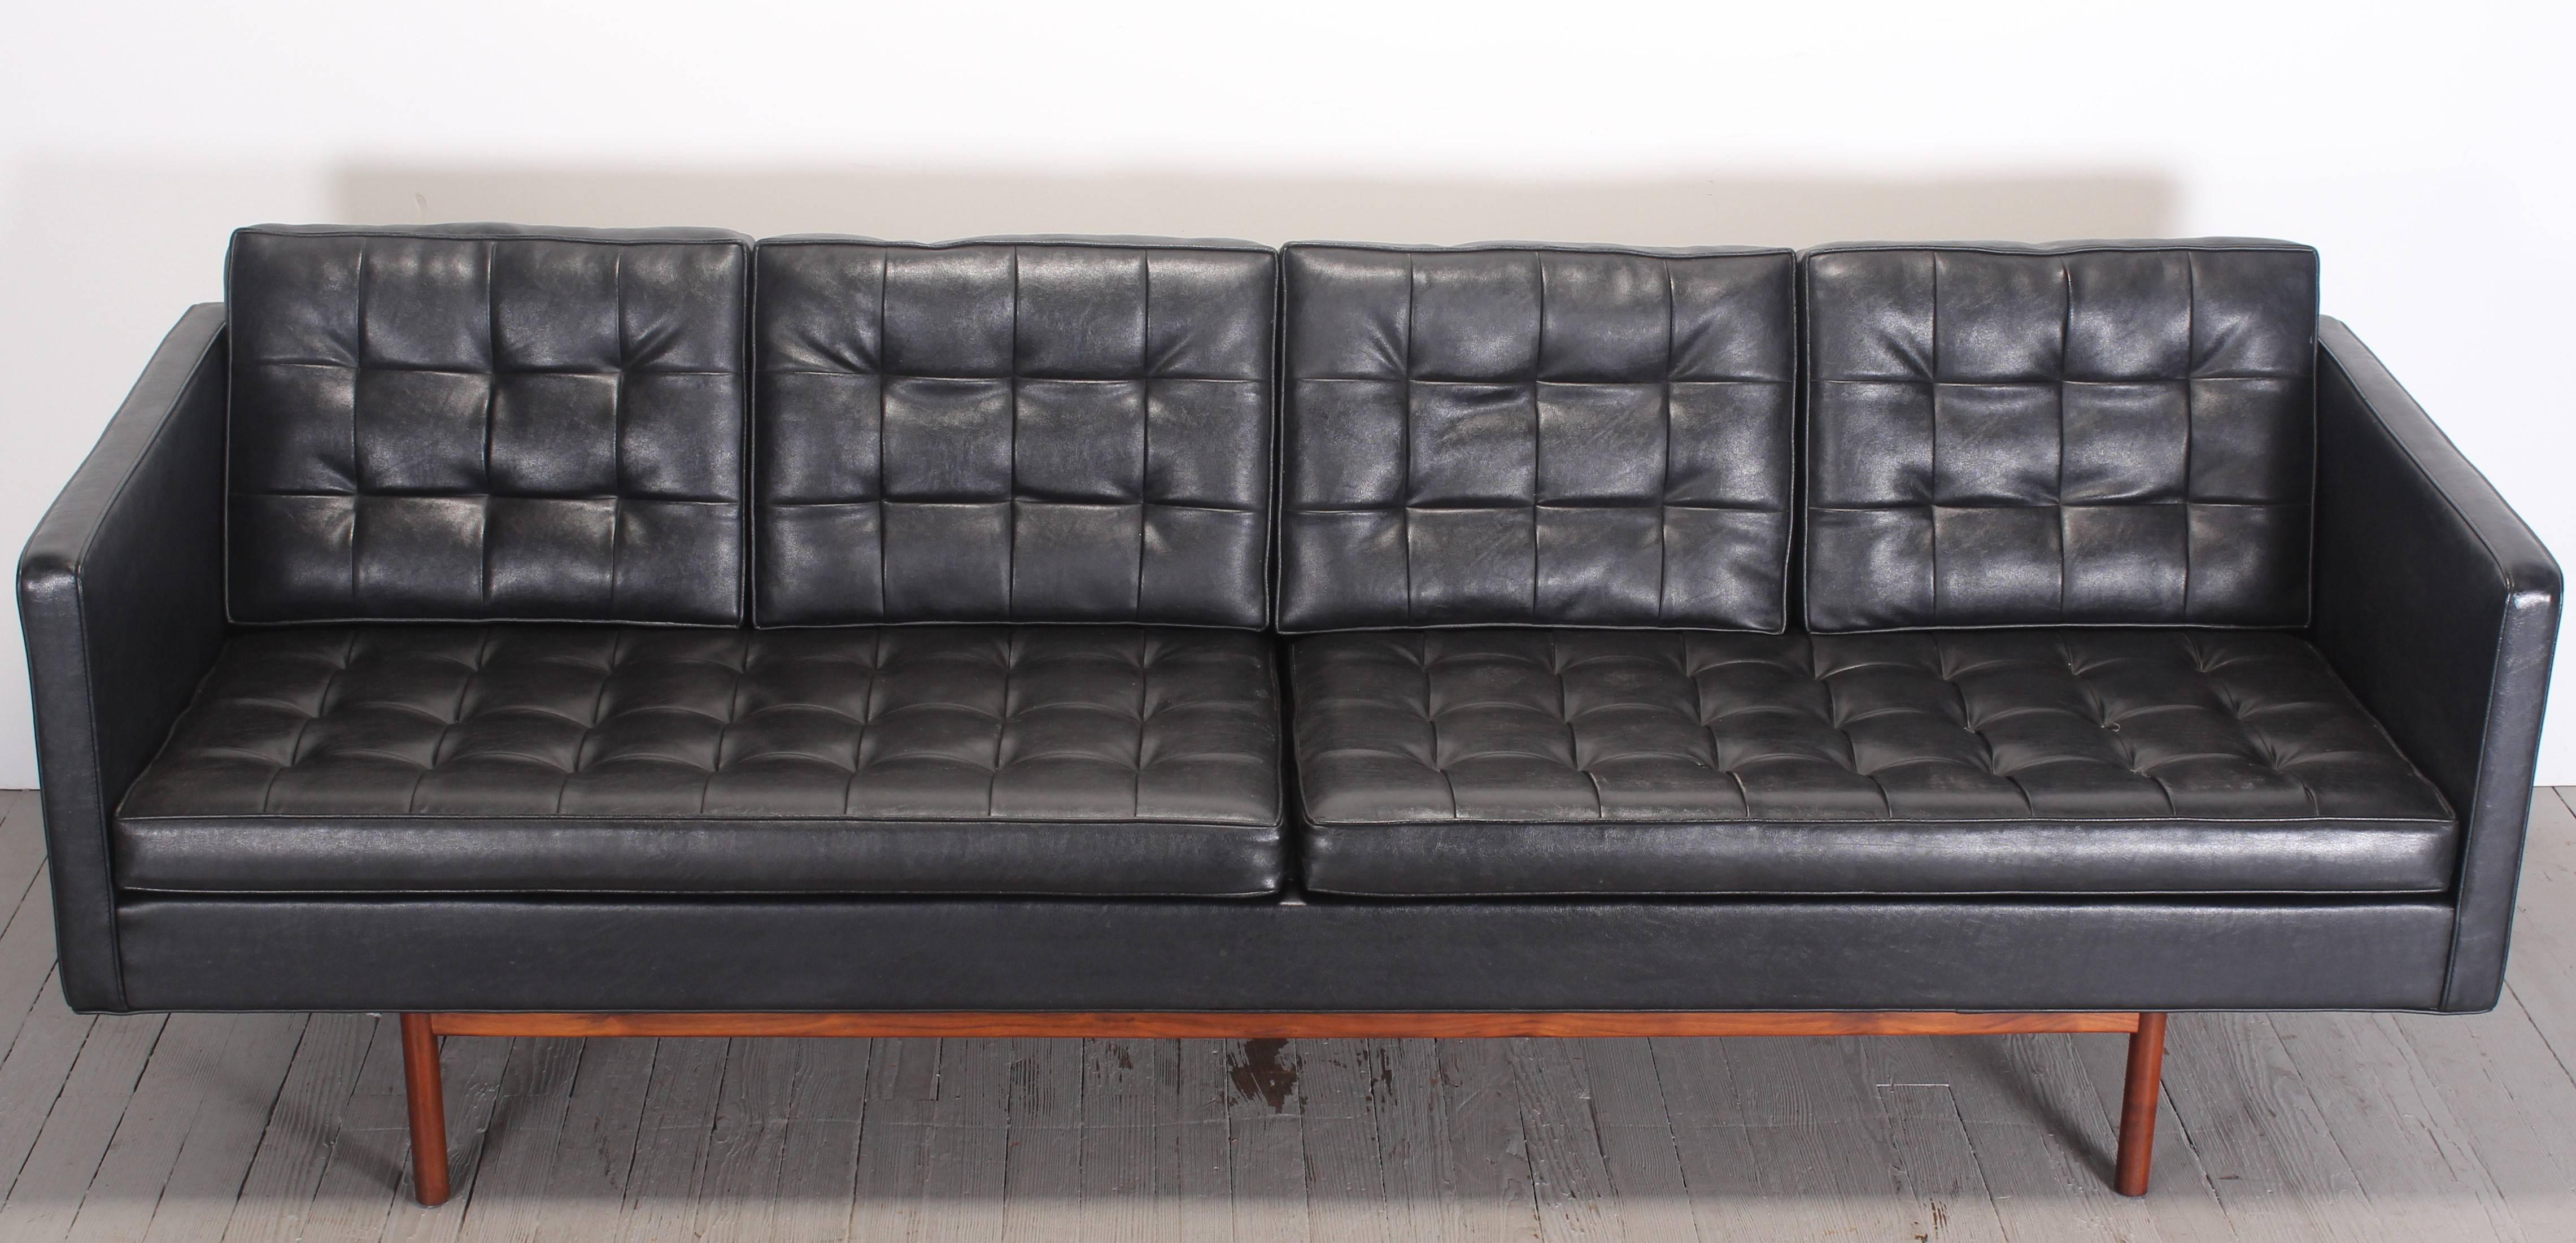 Original black vinyl upholstered Mid-Century Modern sofa designed Milo Baughman for Thayer Coggin in the Danish style. The walnut frame base retains original finish. A great example of American Modern.  Condition: The right seat cushion has several